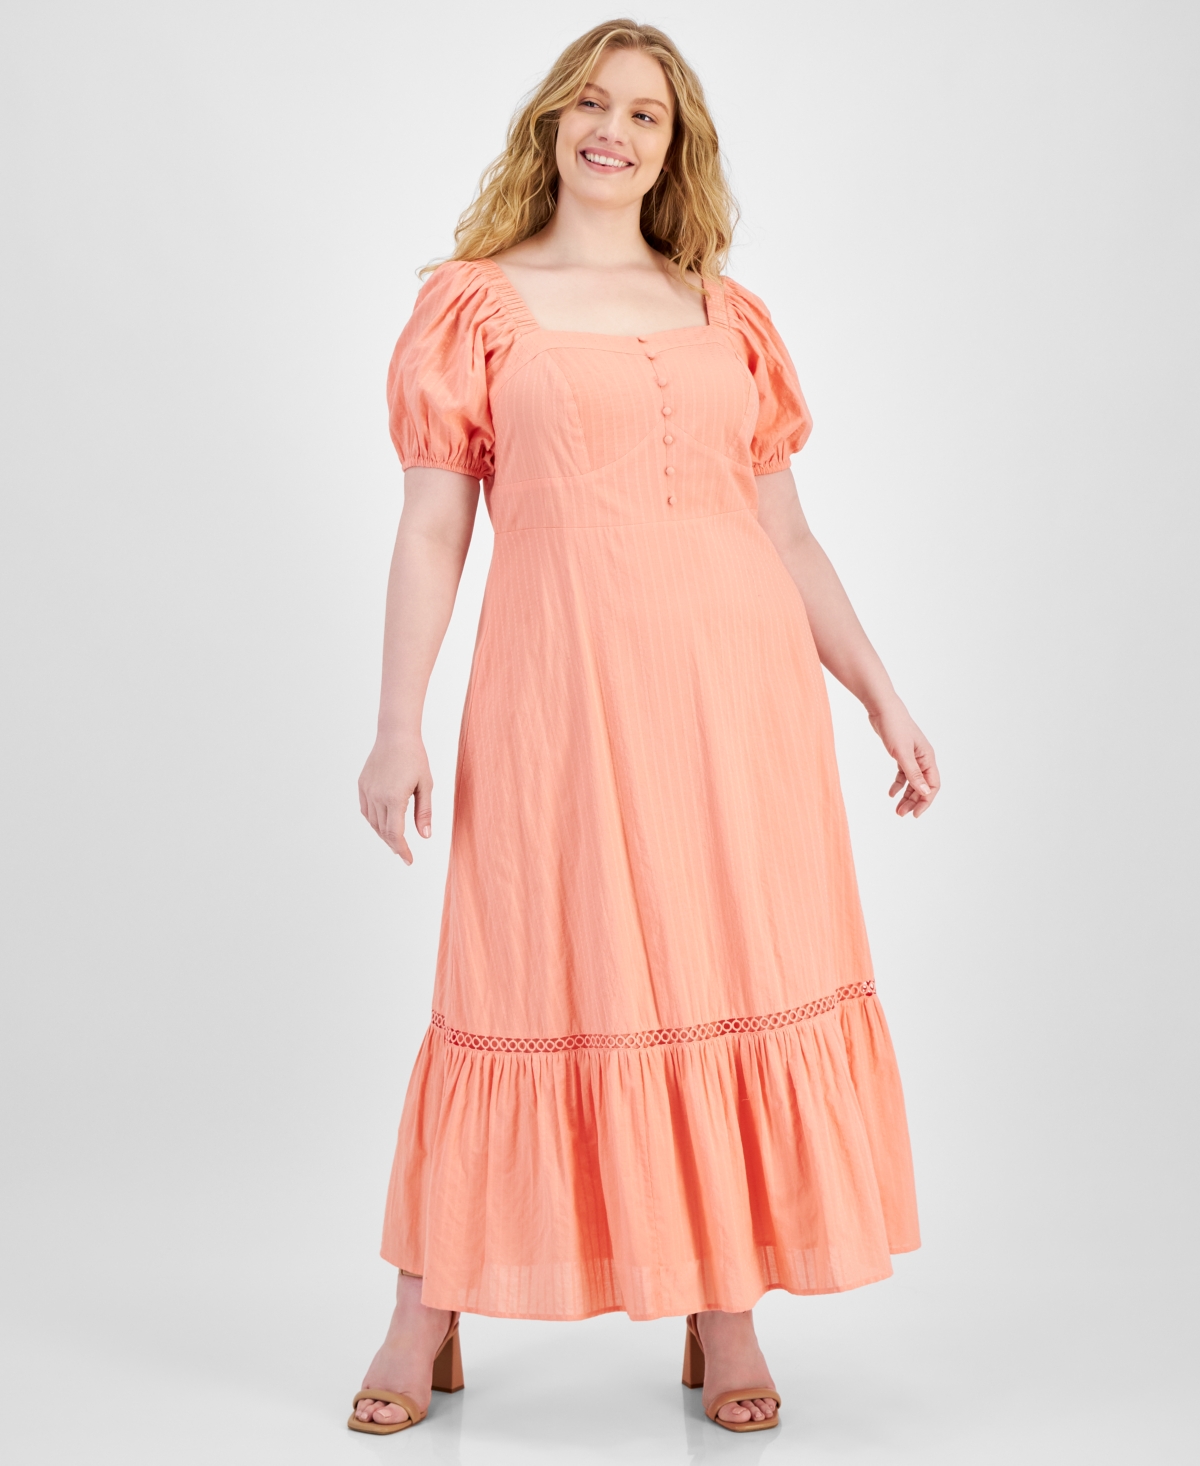 Trendy Plus Size Puff-Sleeve Floral Maxi Dress, Created for Macy's - Warm Peach